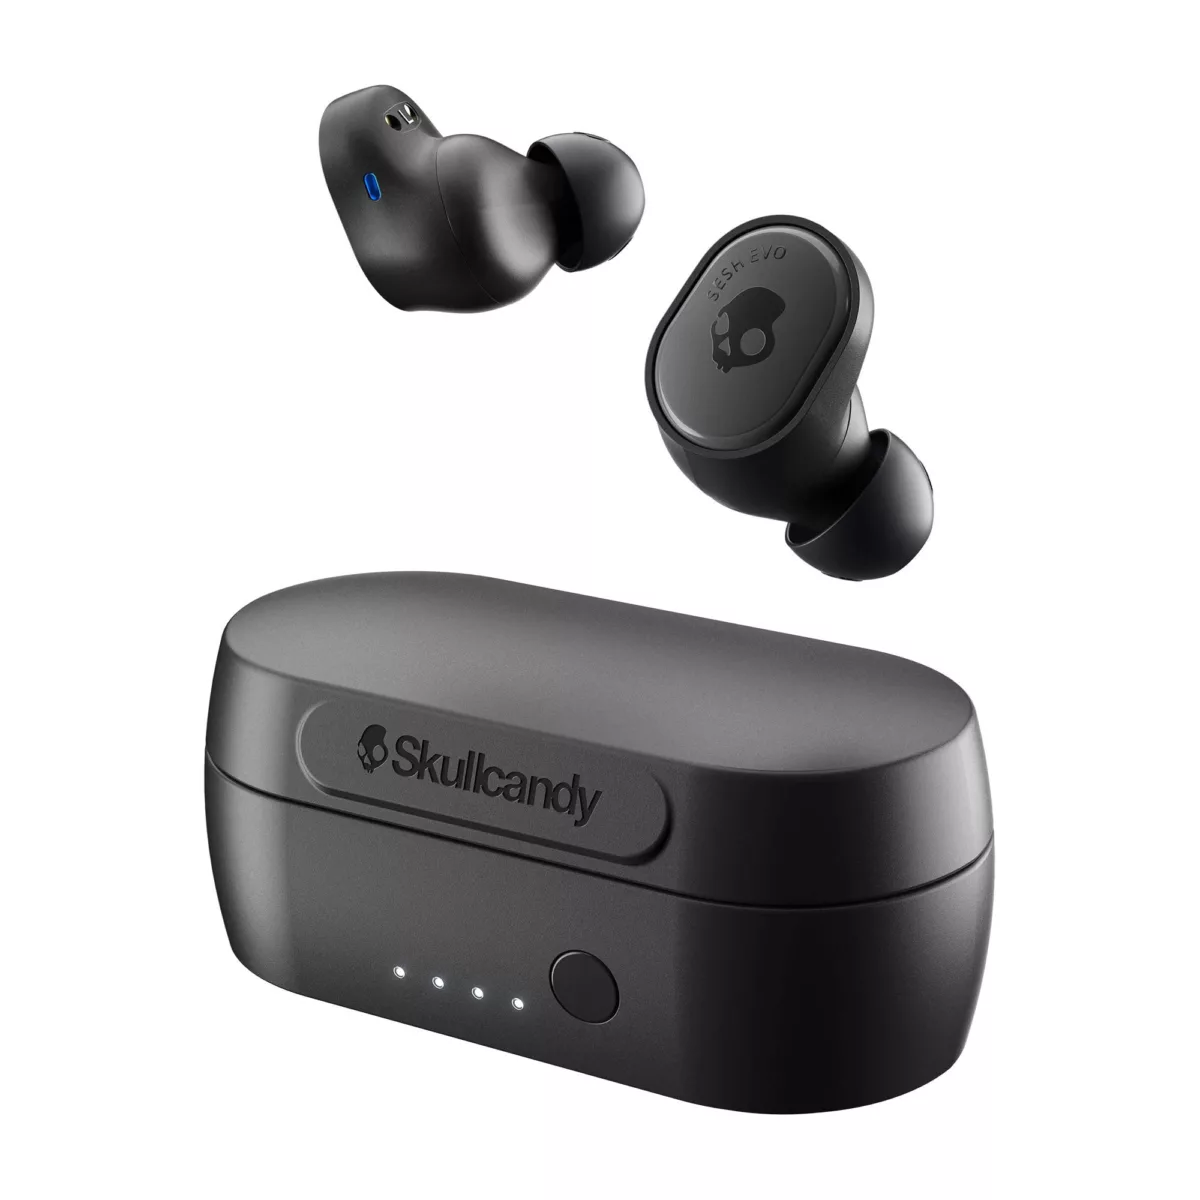 How to Pair Skullcandy Wireless Earbuds? 1